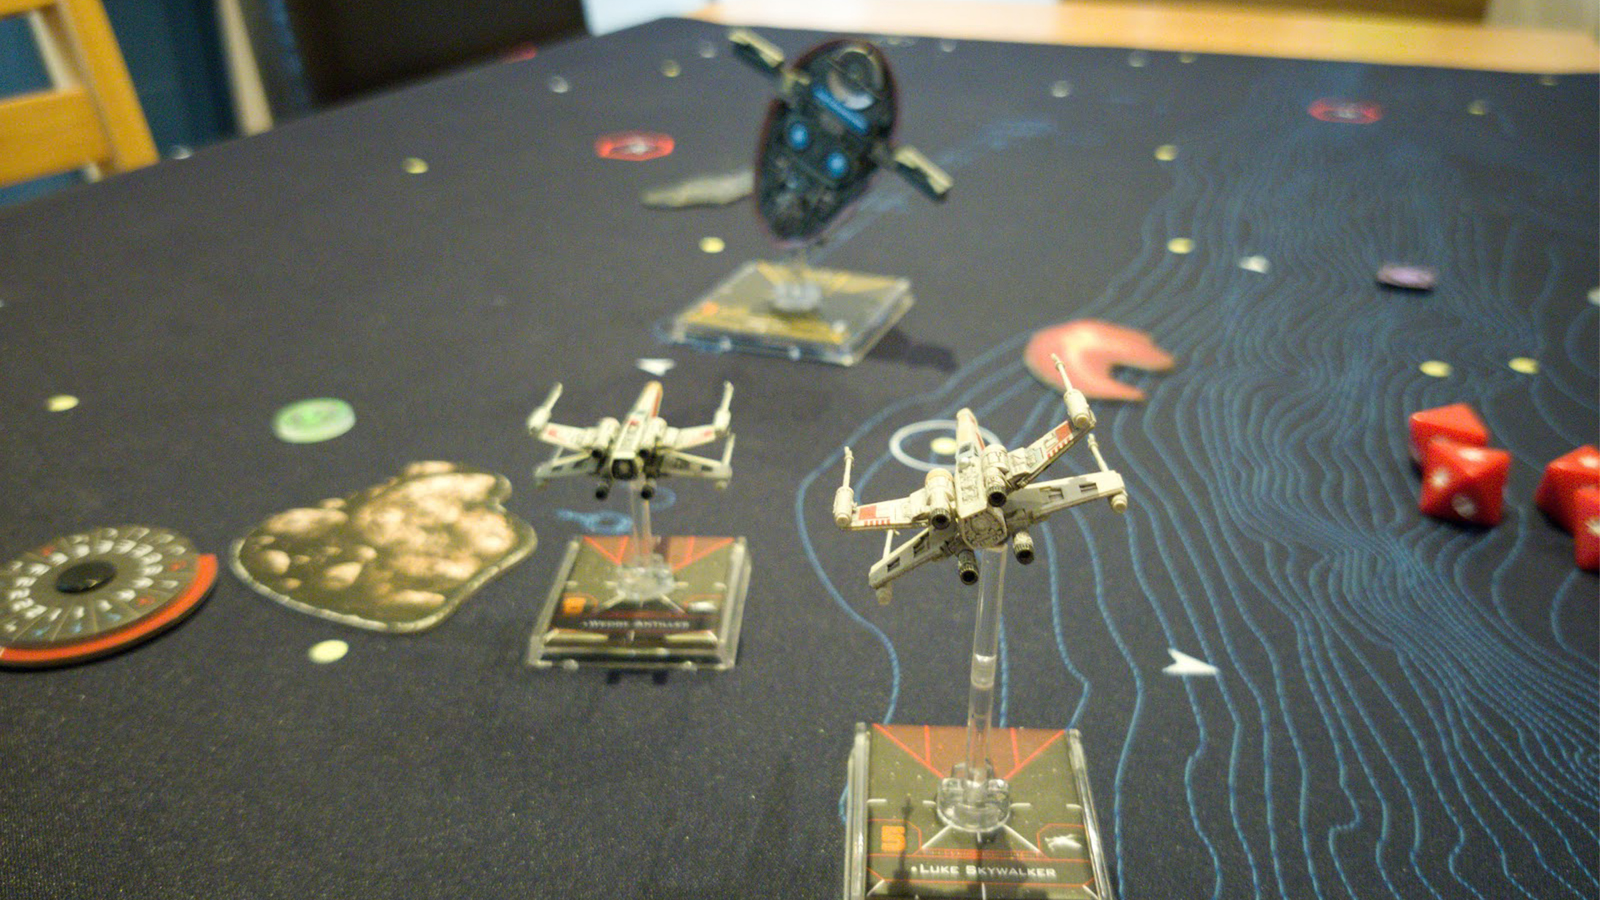 Never Tell Me the Odds: A Look at Star Wars Tabletop Gaming's Past